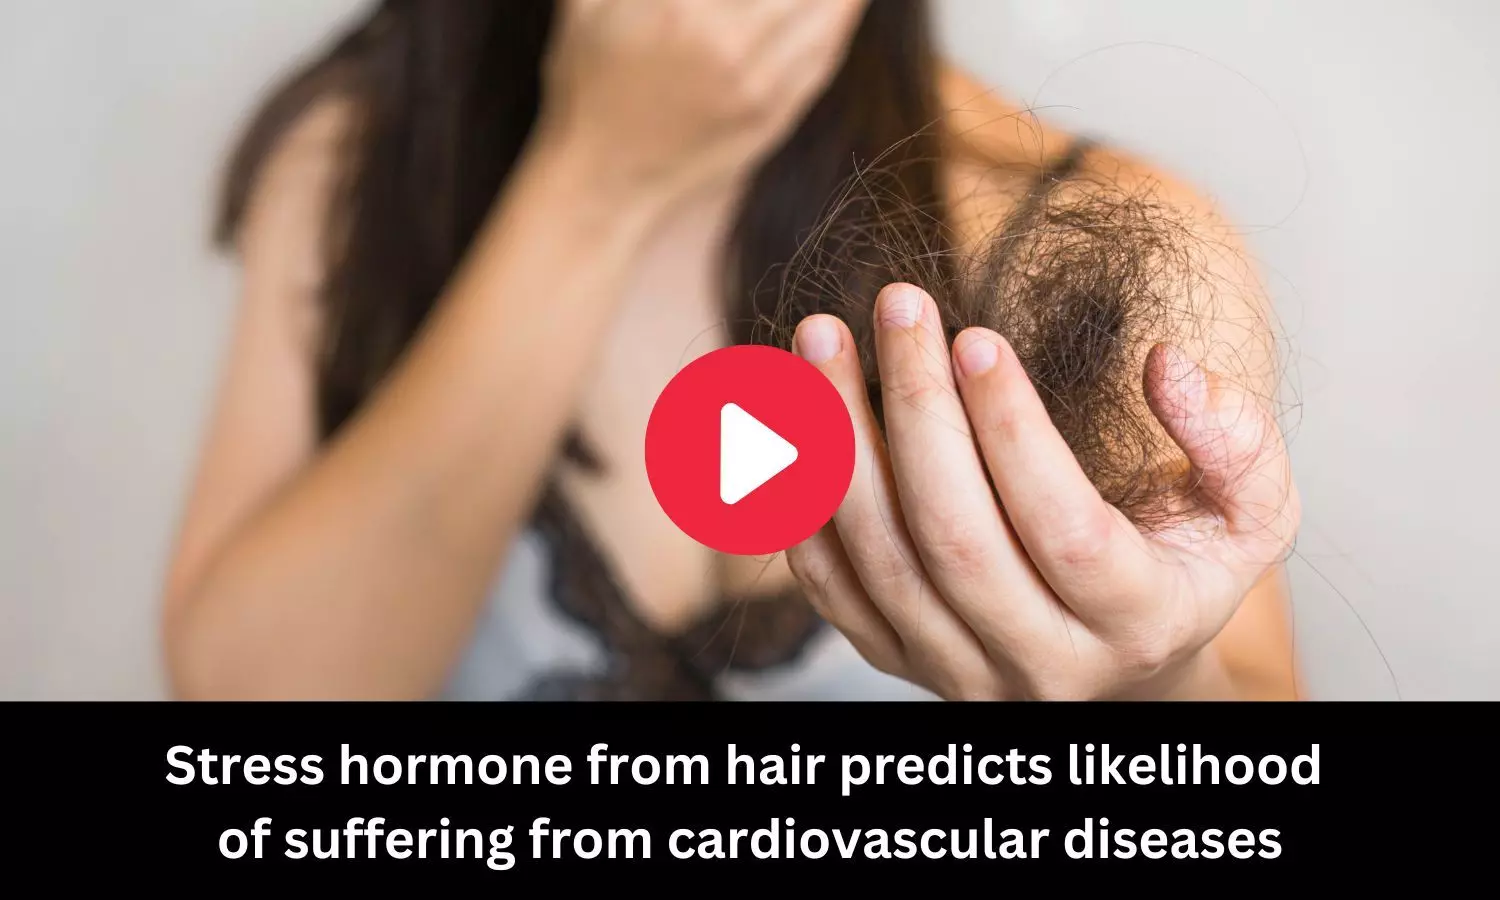 Stress hormone from hair predicts likelihood of suffering from cardiovascular diseases